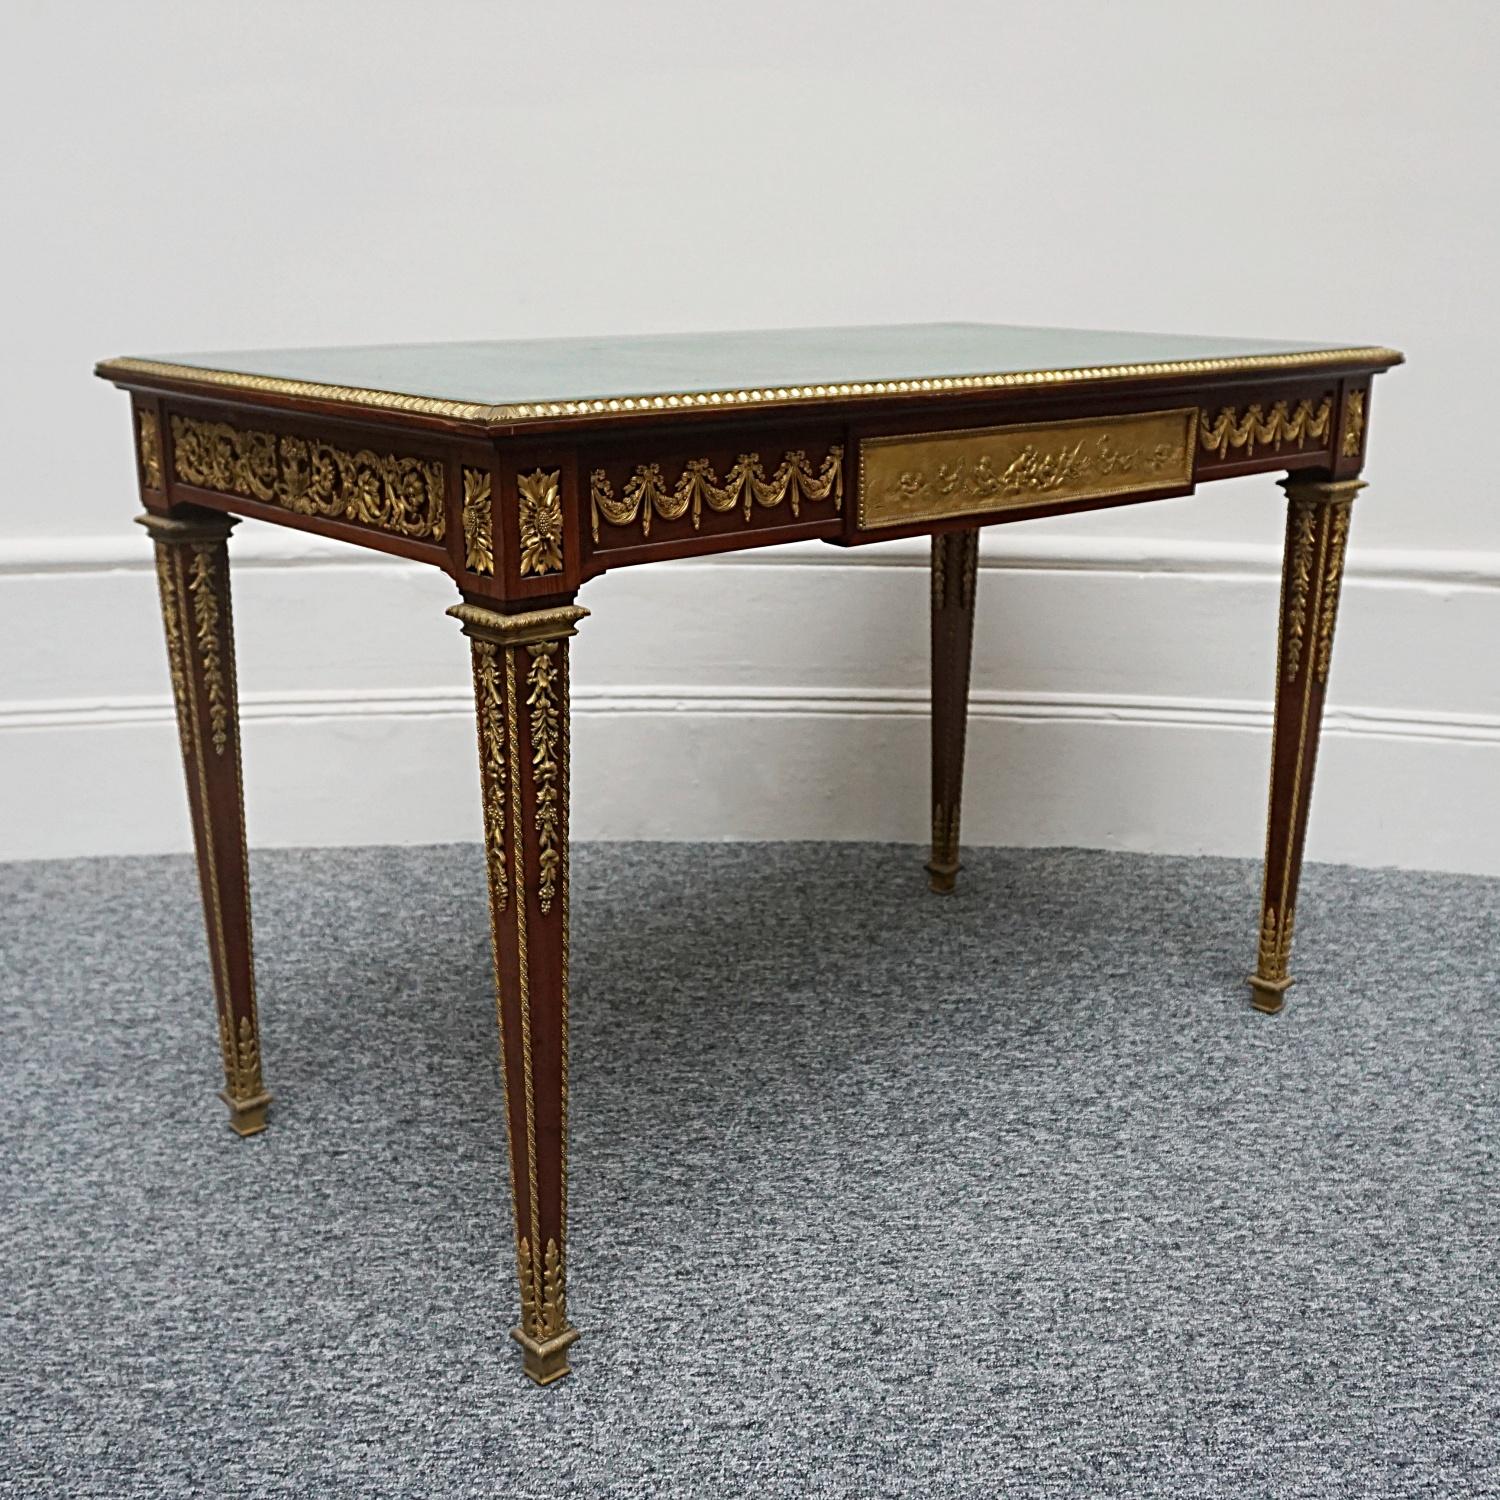 Louis XVI Style Gilt-Bronze Mounted Kingwood Writing Table by Francois Linke For Sale 7